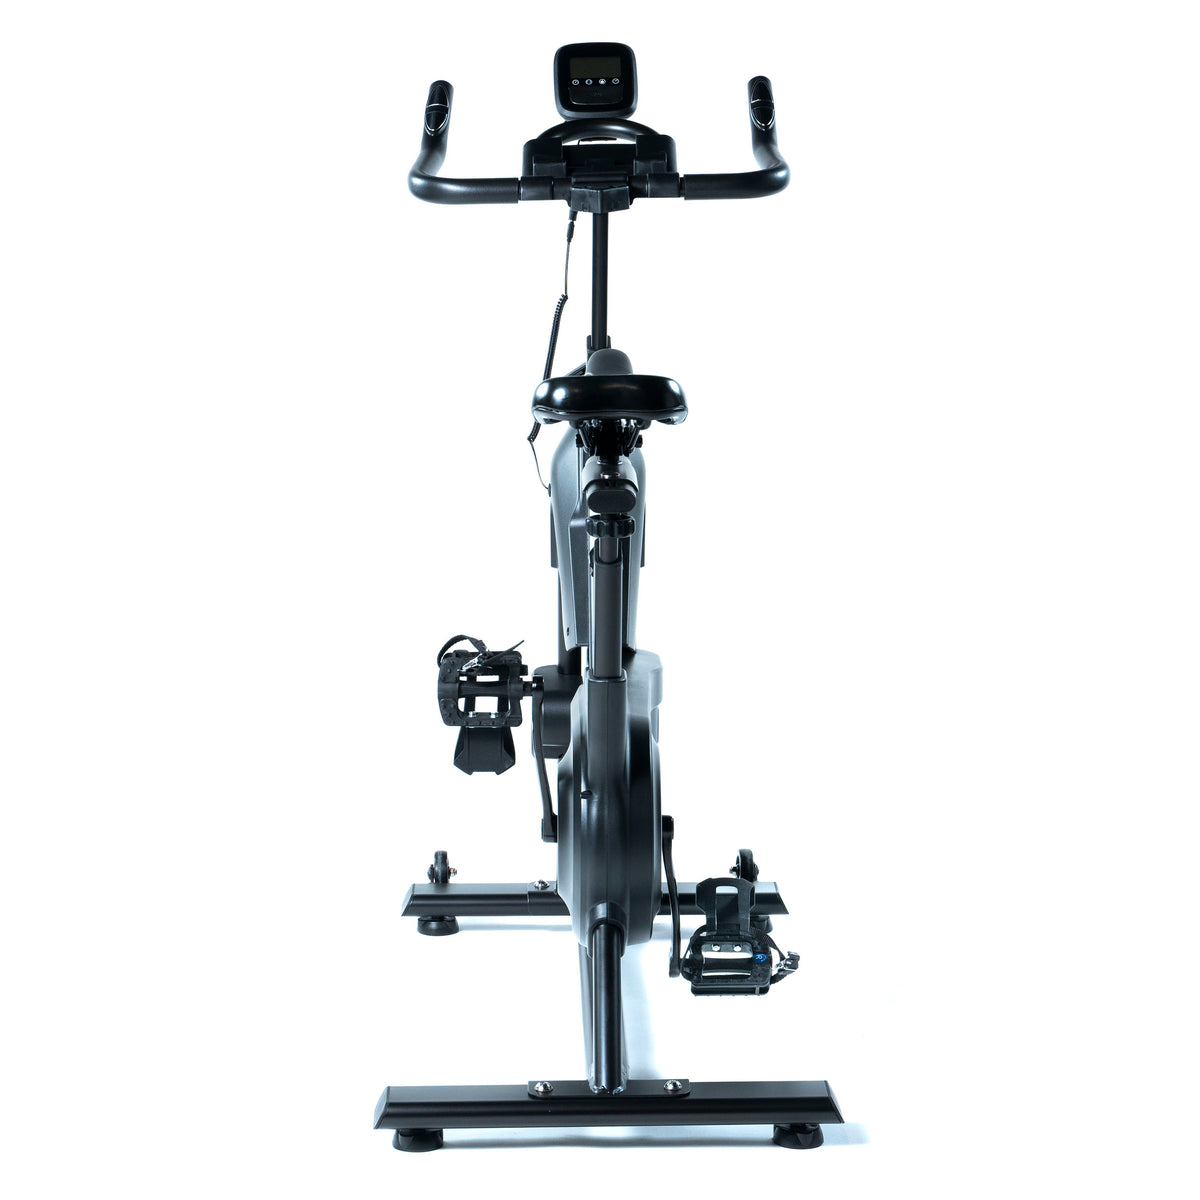 FitWay Equip. 500IC Indoor Cycle rear view